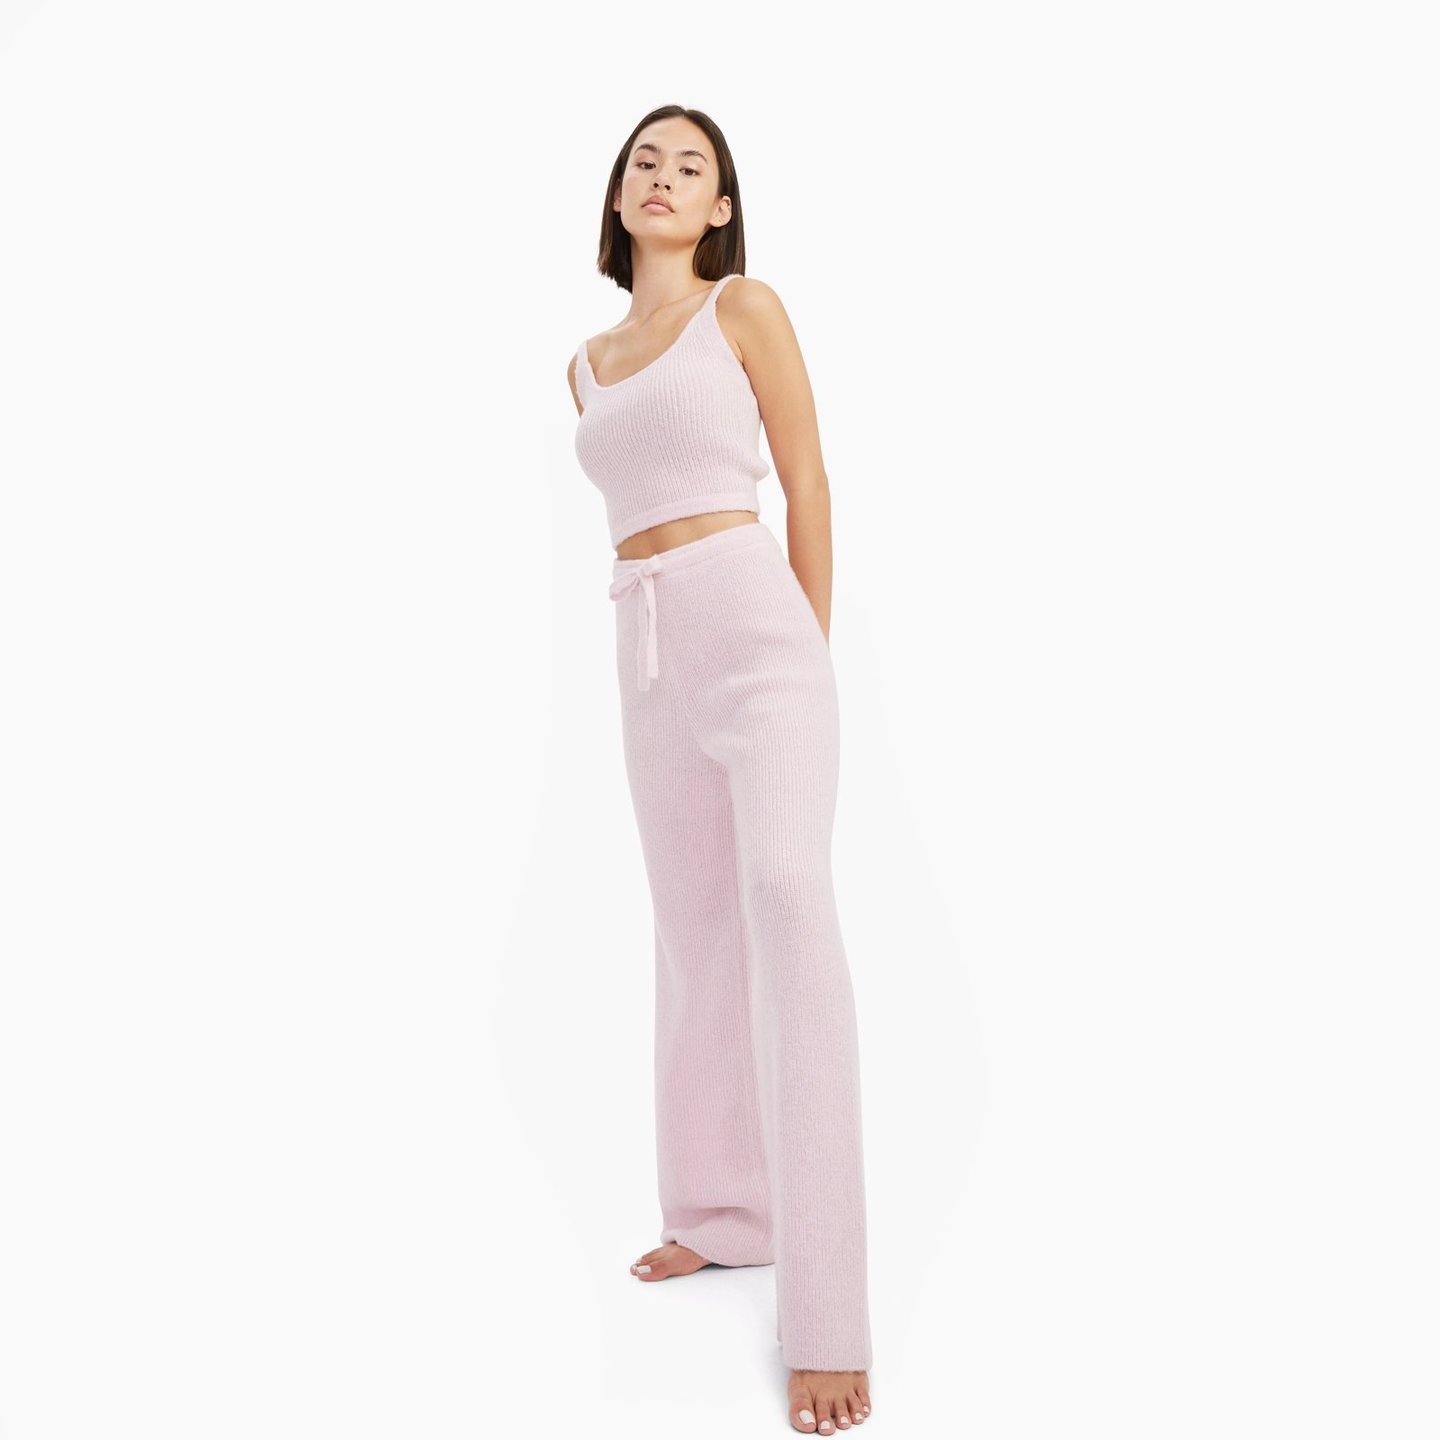 NWEP001444_Luxe_Merino_Cashmere_Wide_Leg_Pant_Dusty_Pink_020_659b6c02-4d63-4b88-a230-017d33facc1.jpg